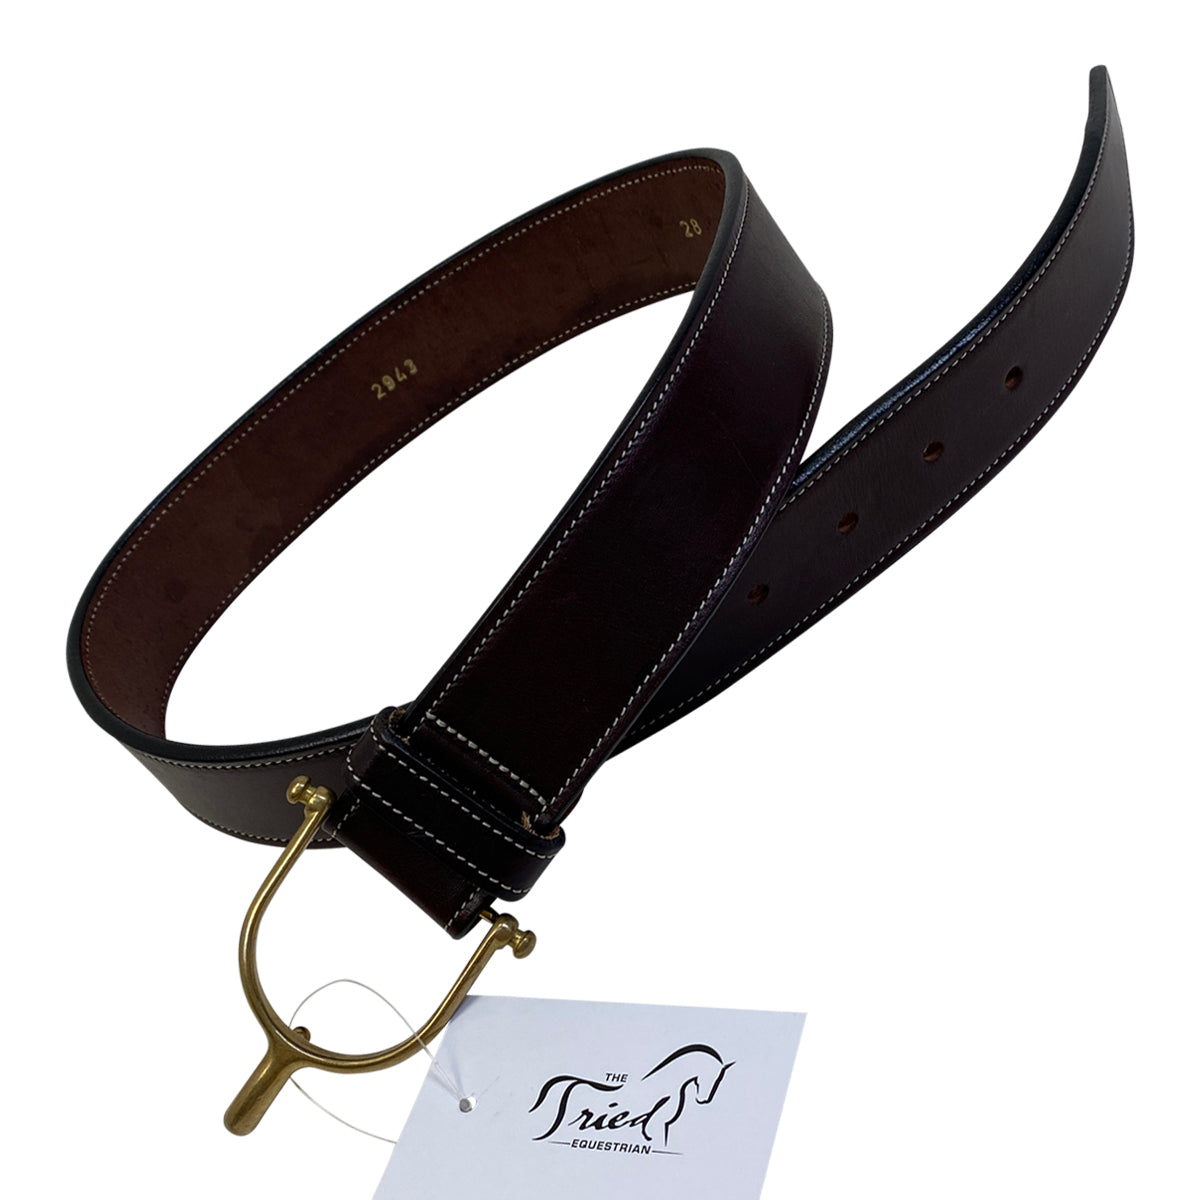 Leather Spur Belt in Chocolate